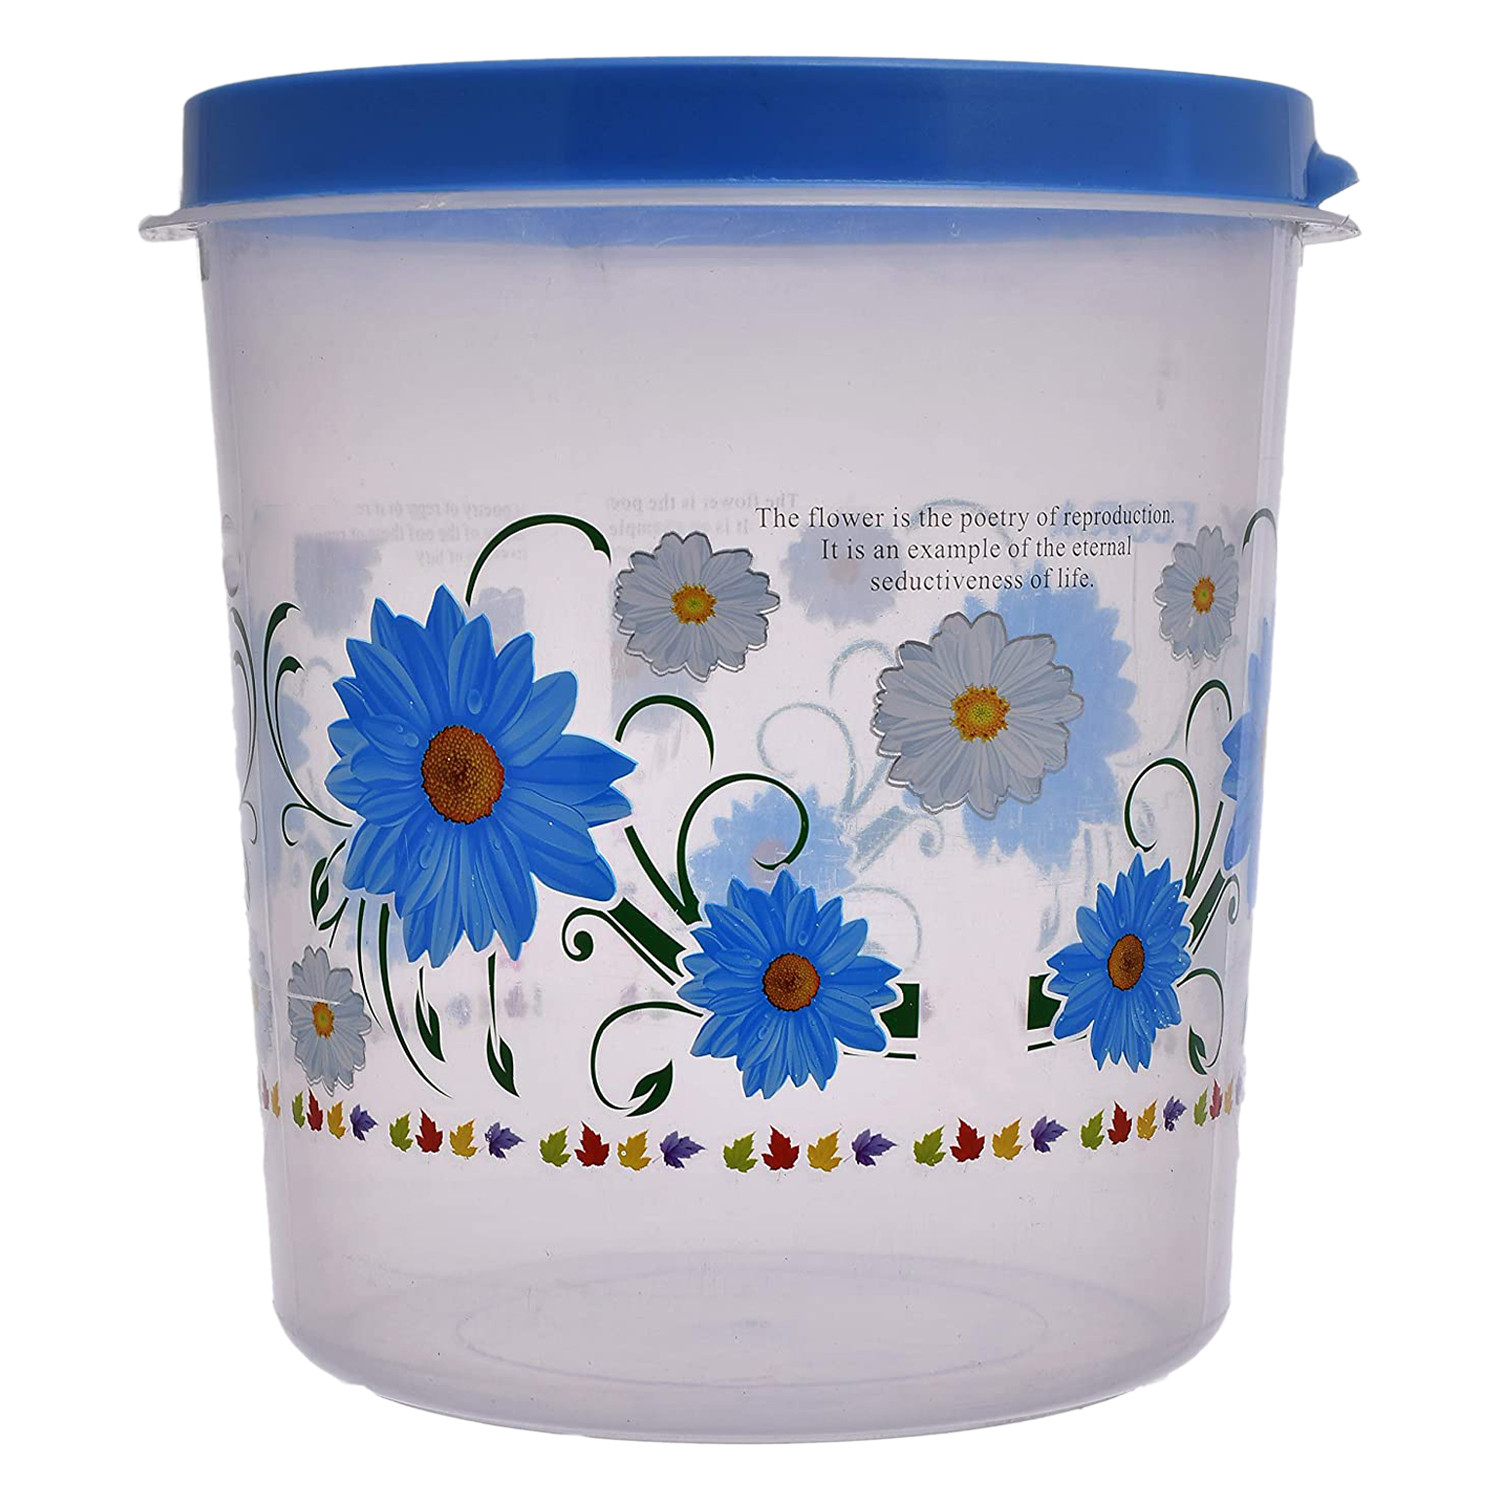 Kuber Industries Storage Container|Durable Plastic Floral Design BPA Free Food Kitchen Organizer With Lid|Food Utility Jar, 5 Ltr (Blue)